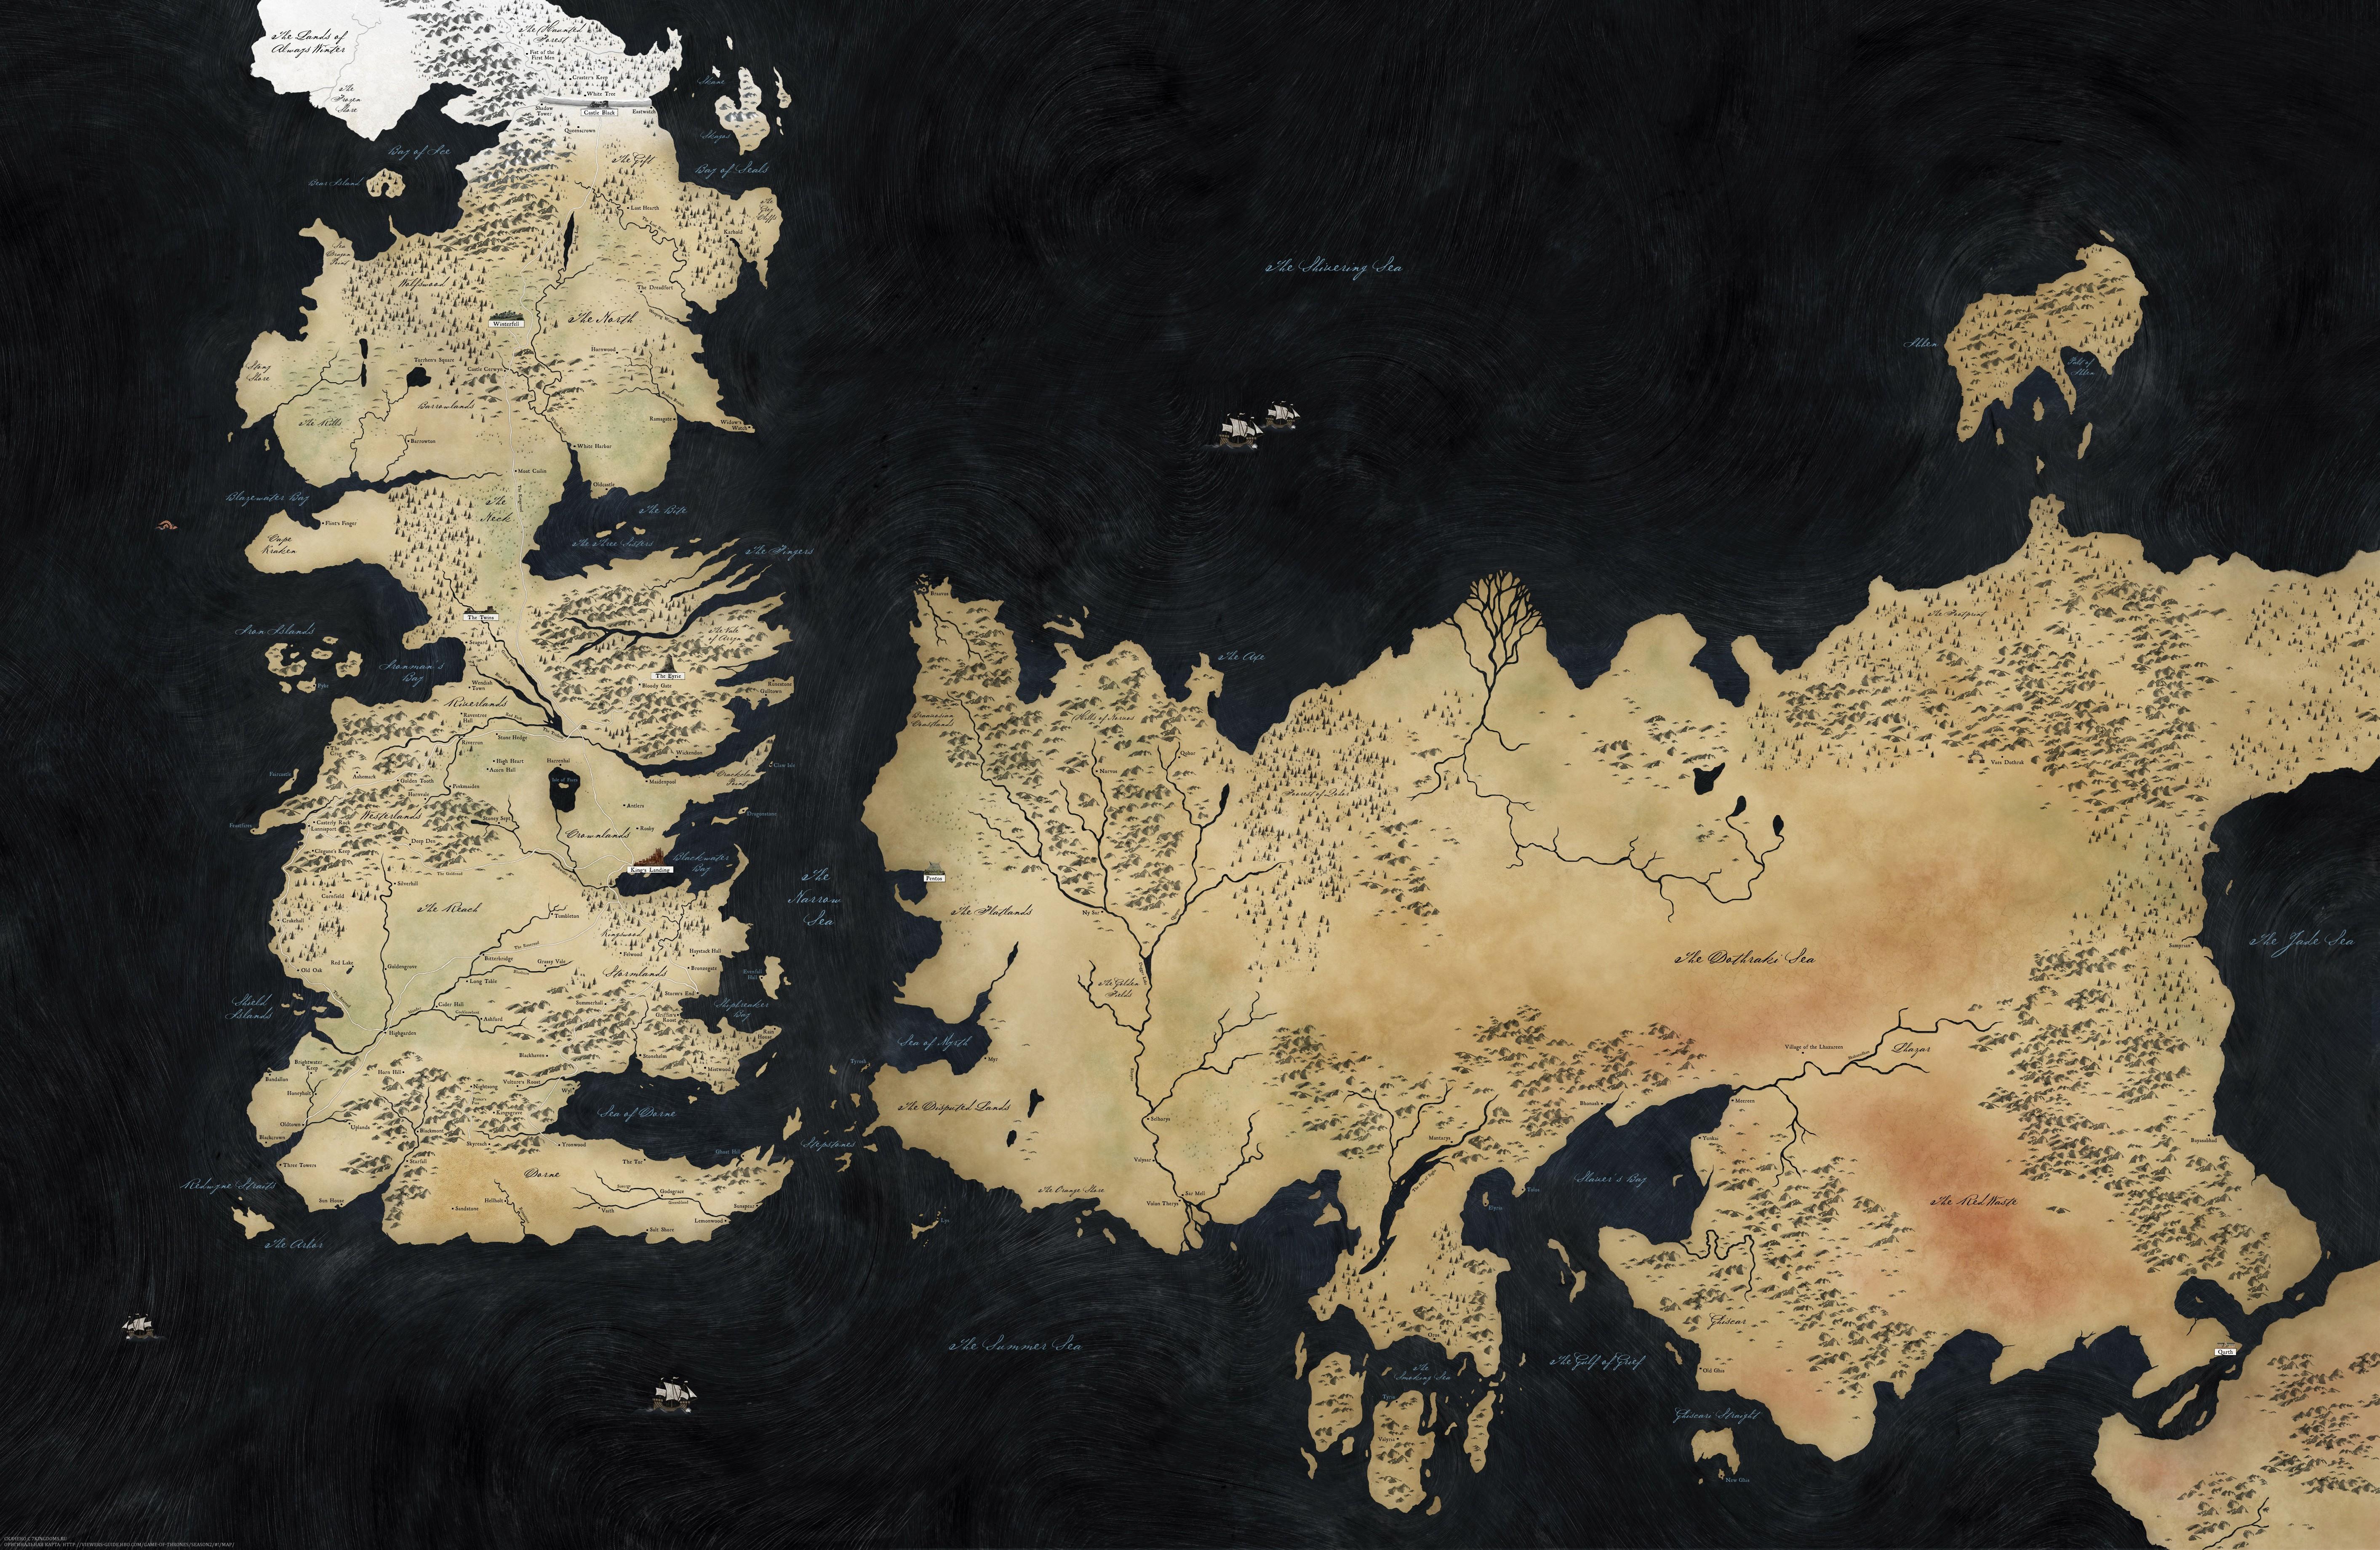 fantasy art, books, maps, Game of Thrones, world map, A Song Of Ice